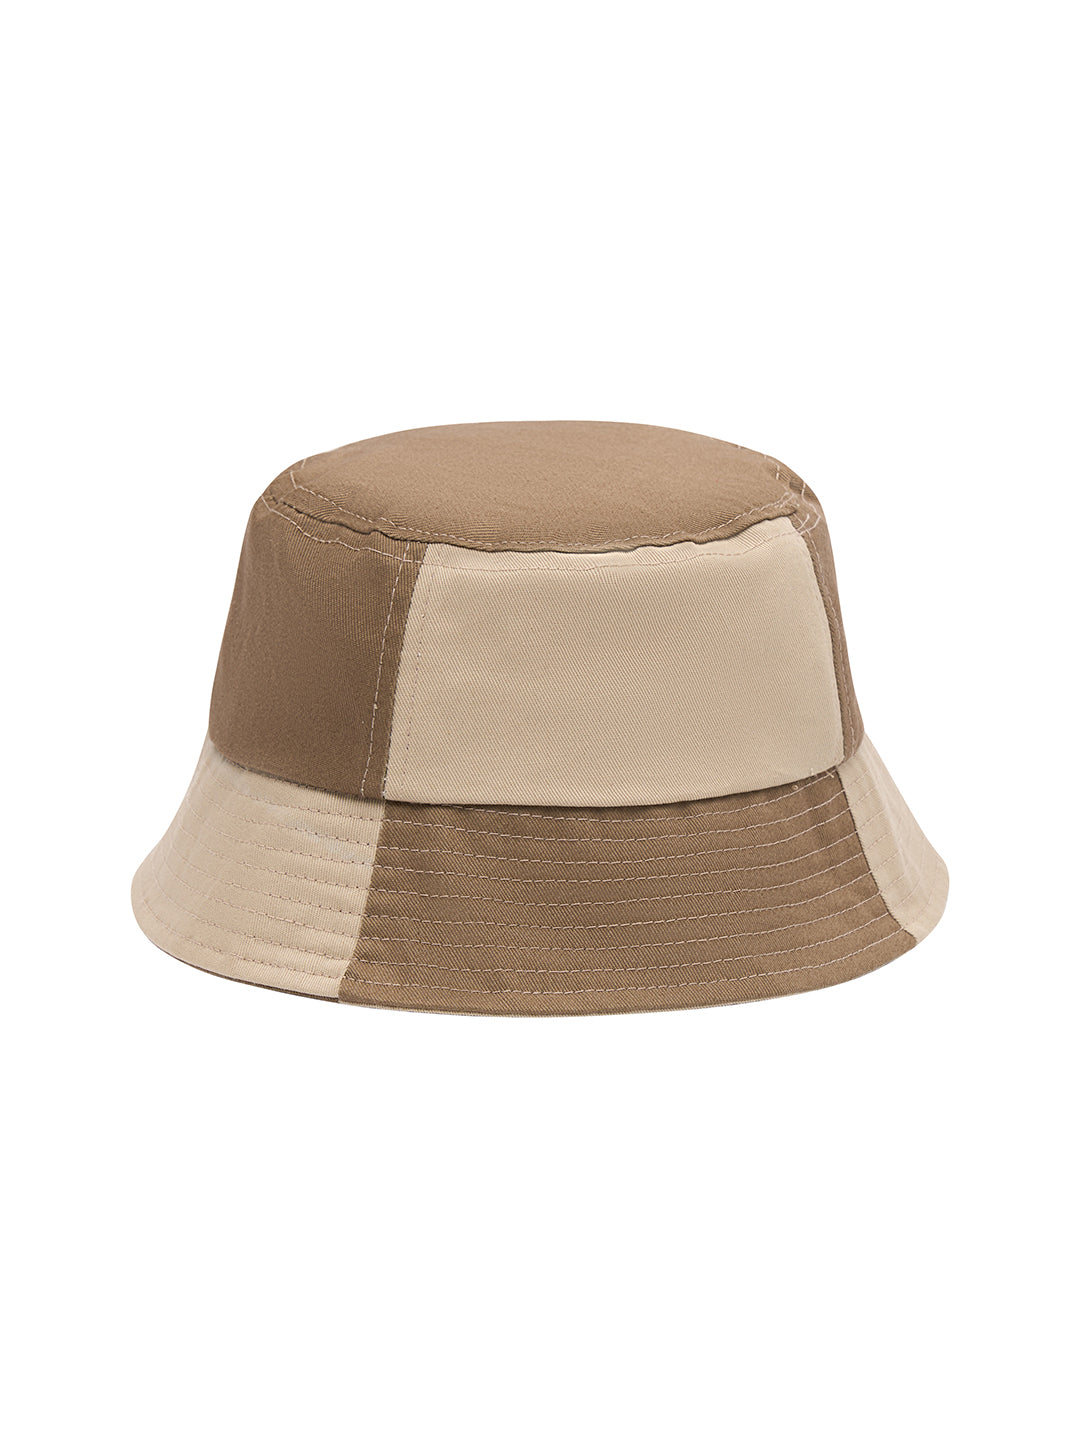 Connection Bucket Hat - Willow